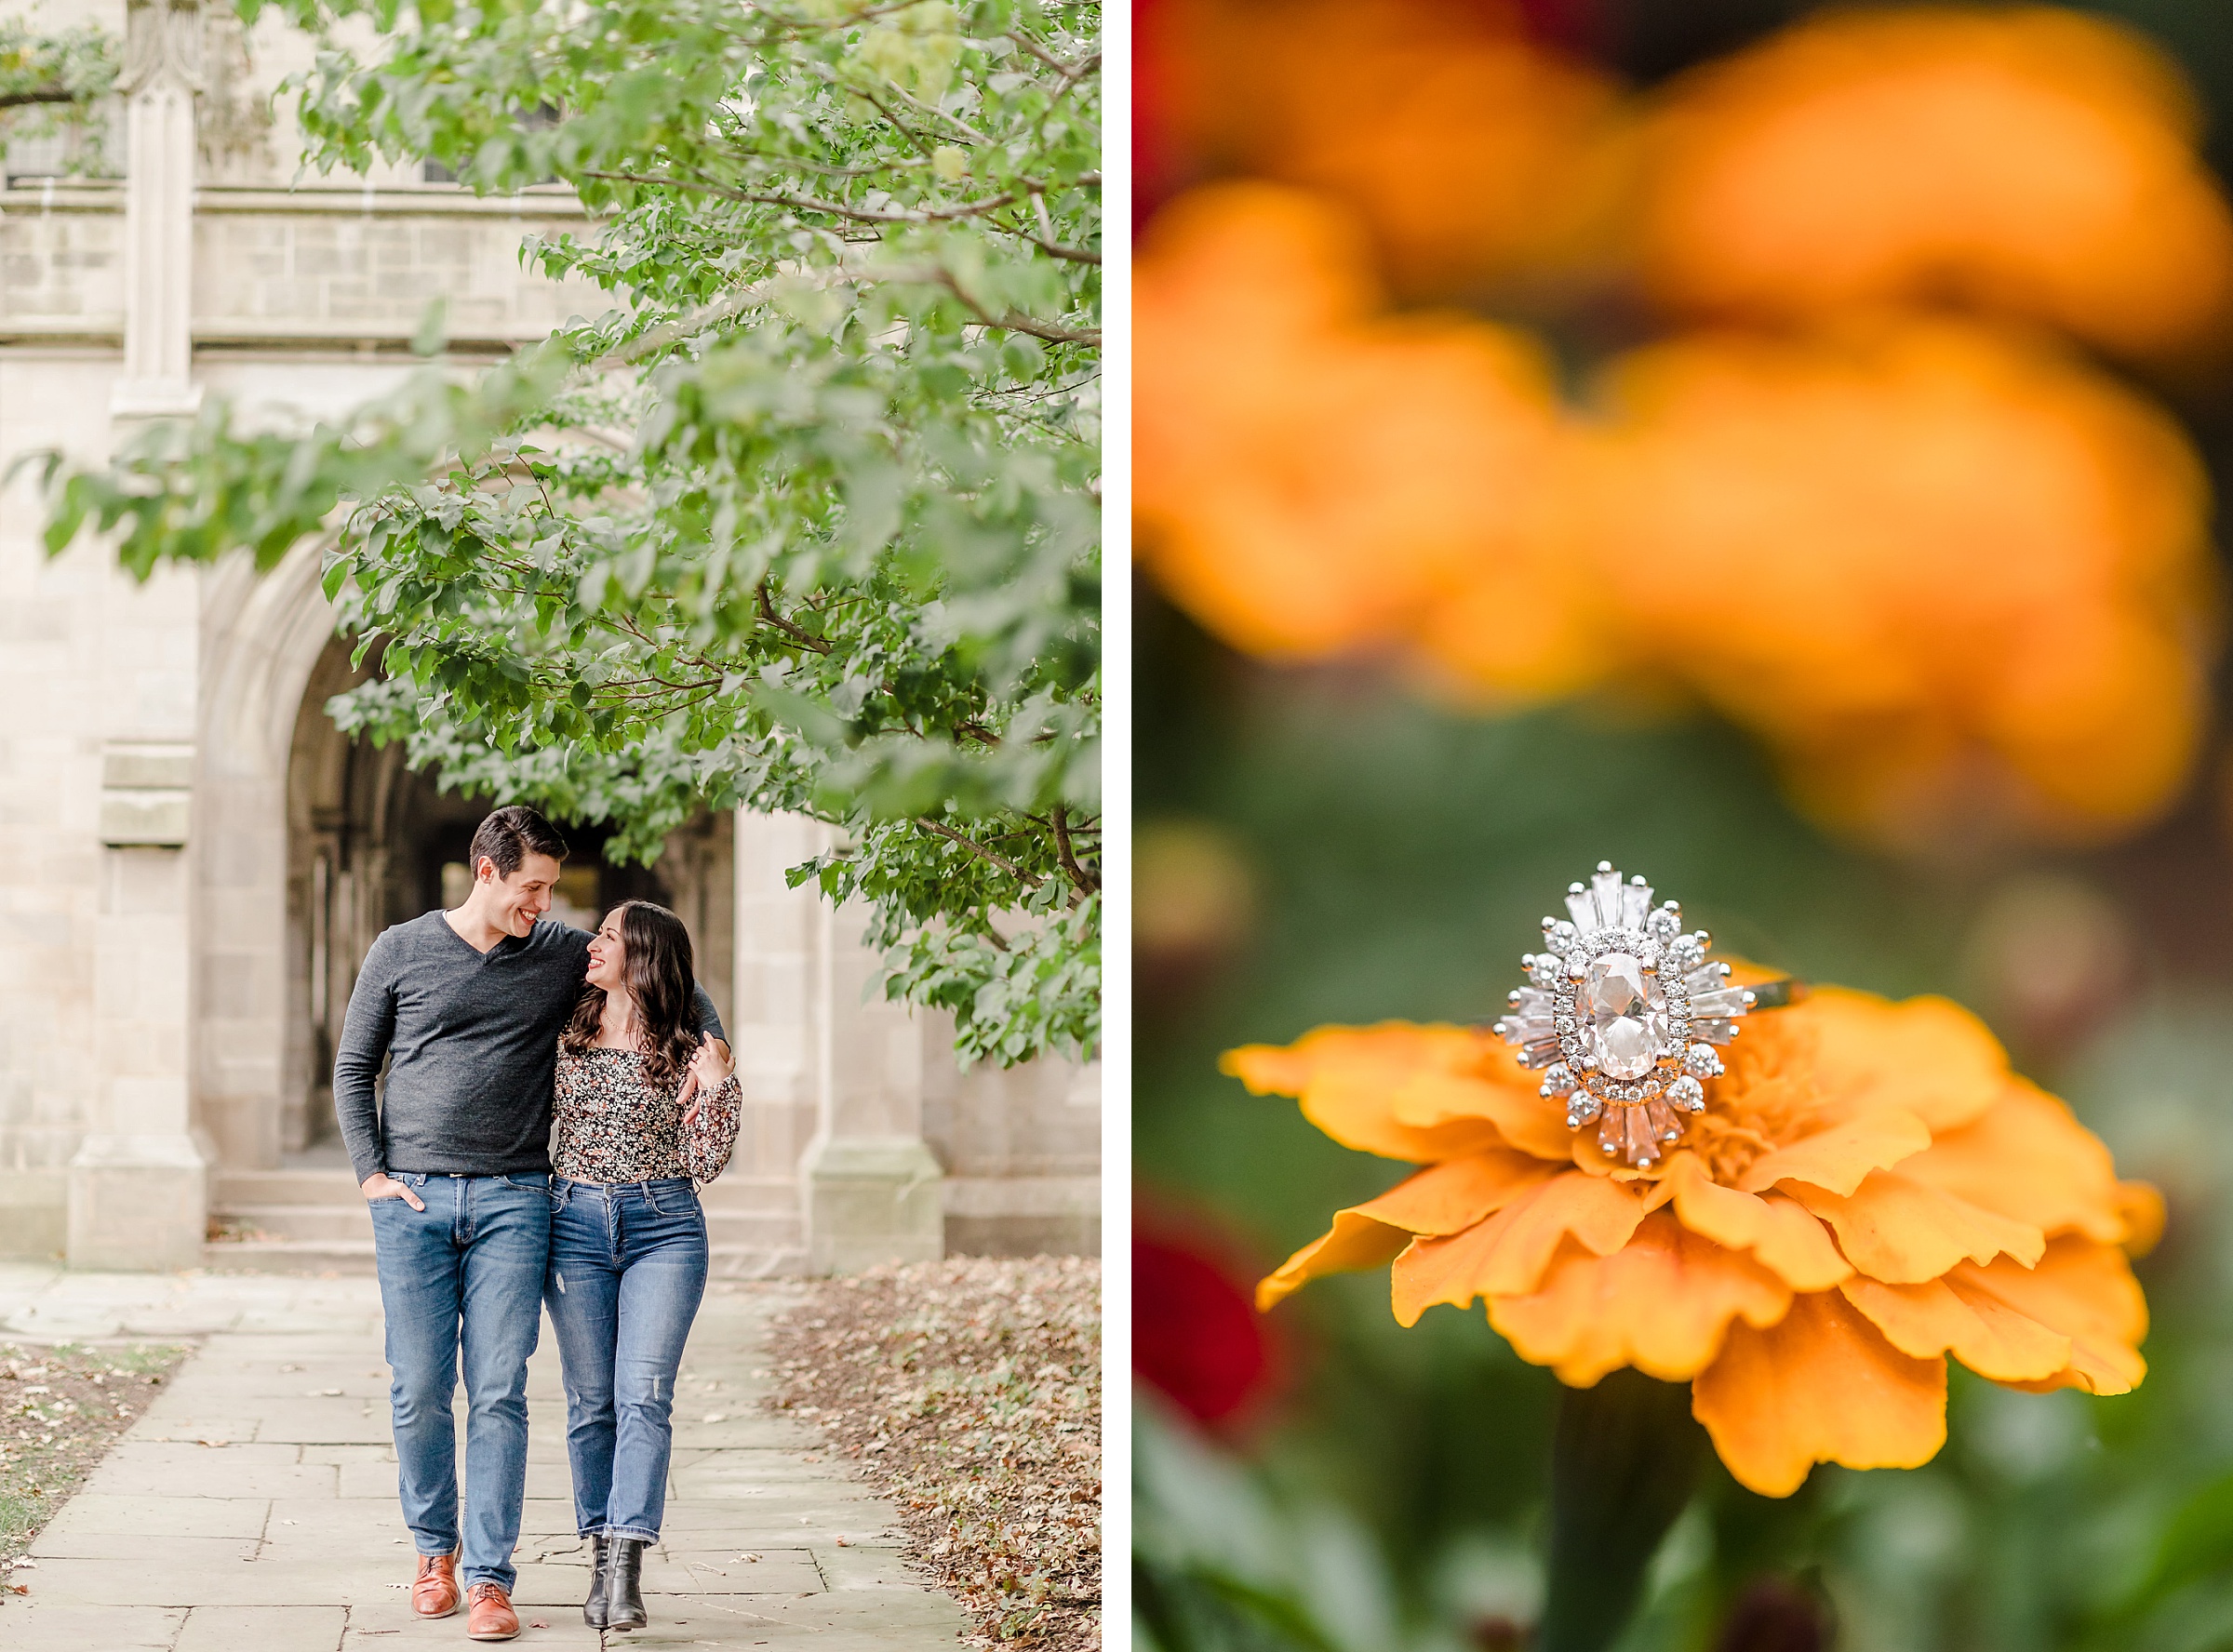 Couple walk together during their engagement session at the University of Chicago in Chicago, Illinois.